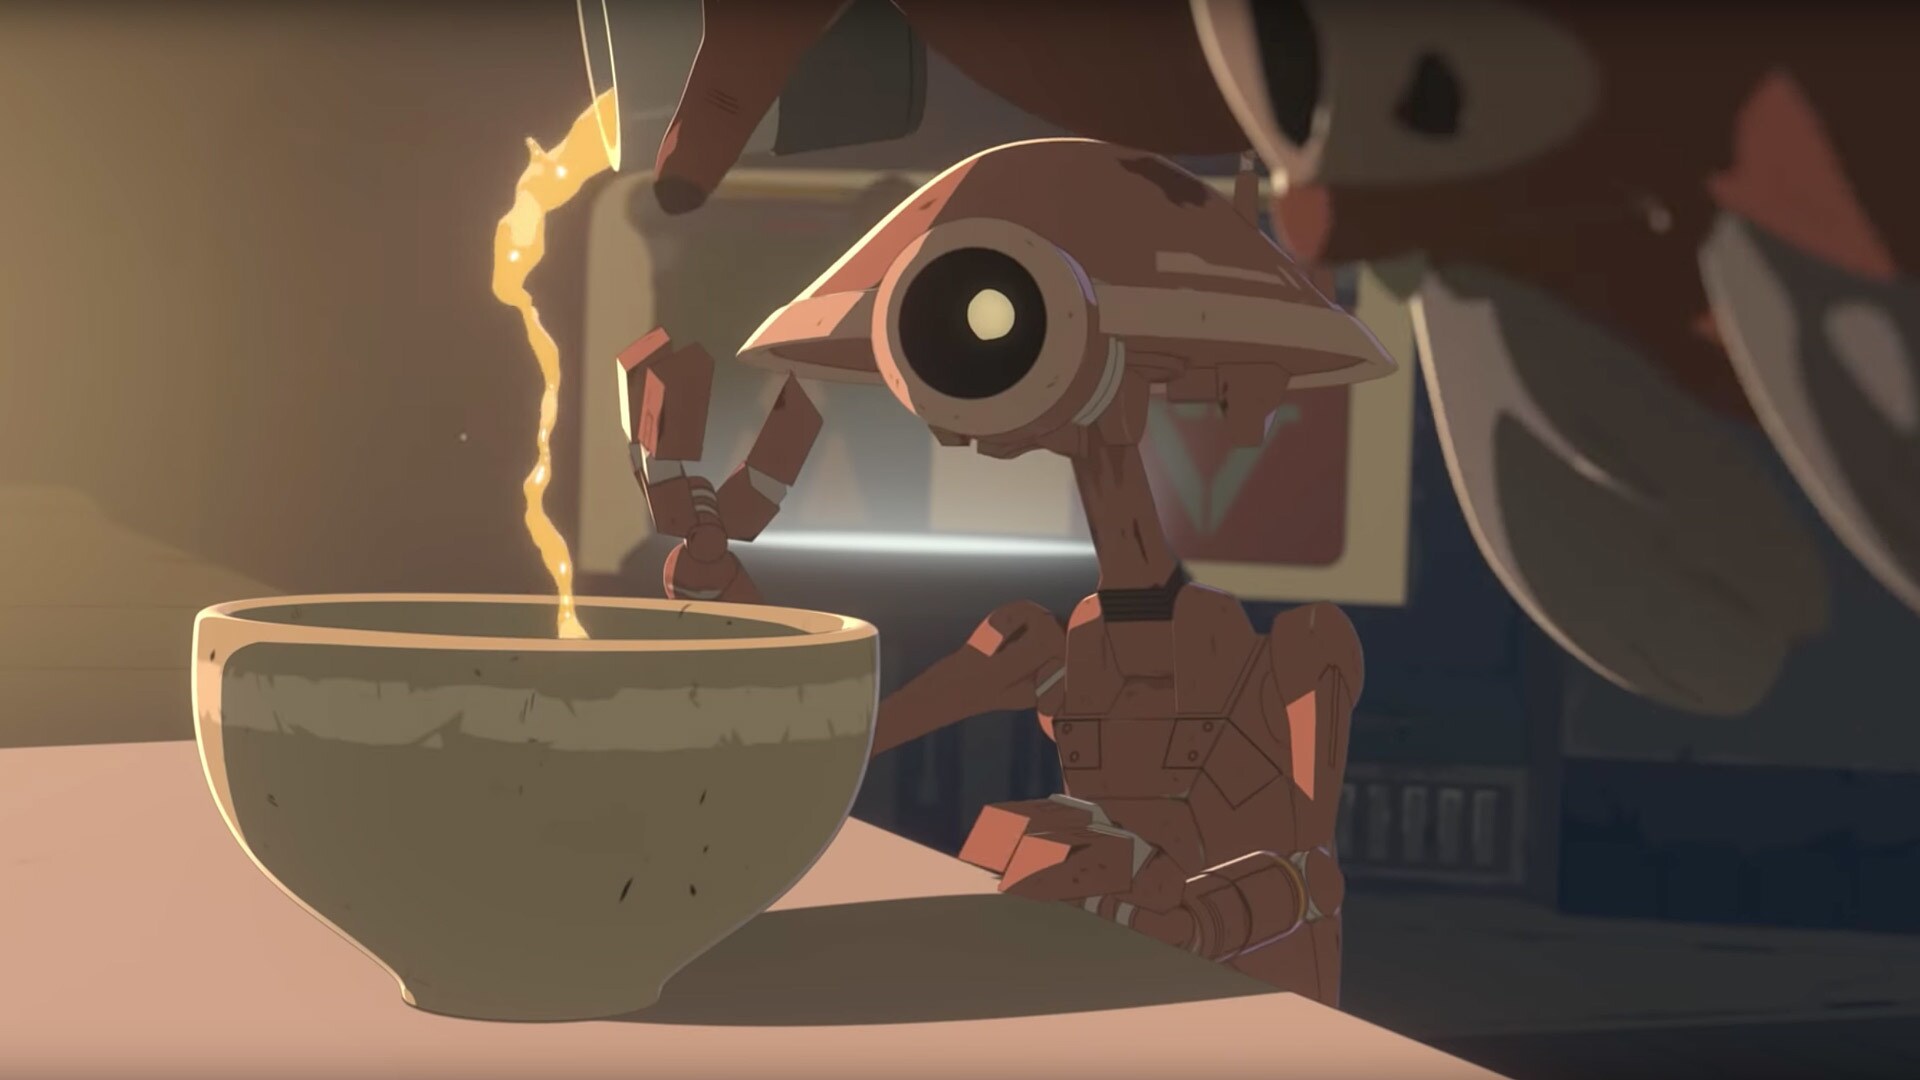 There’s a reason why Cantinas don’t serve droids!